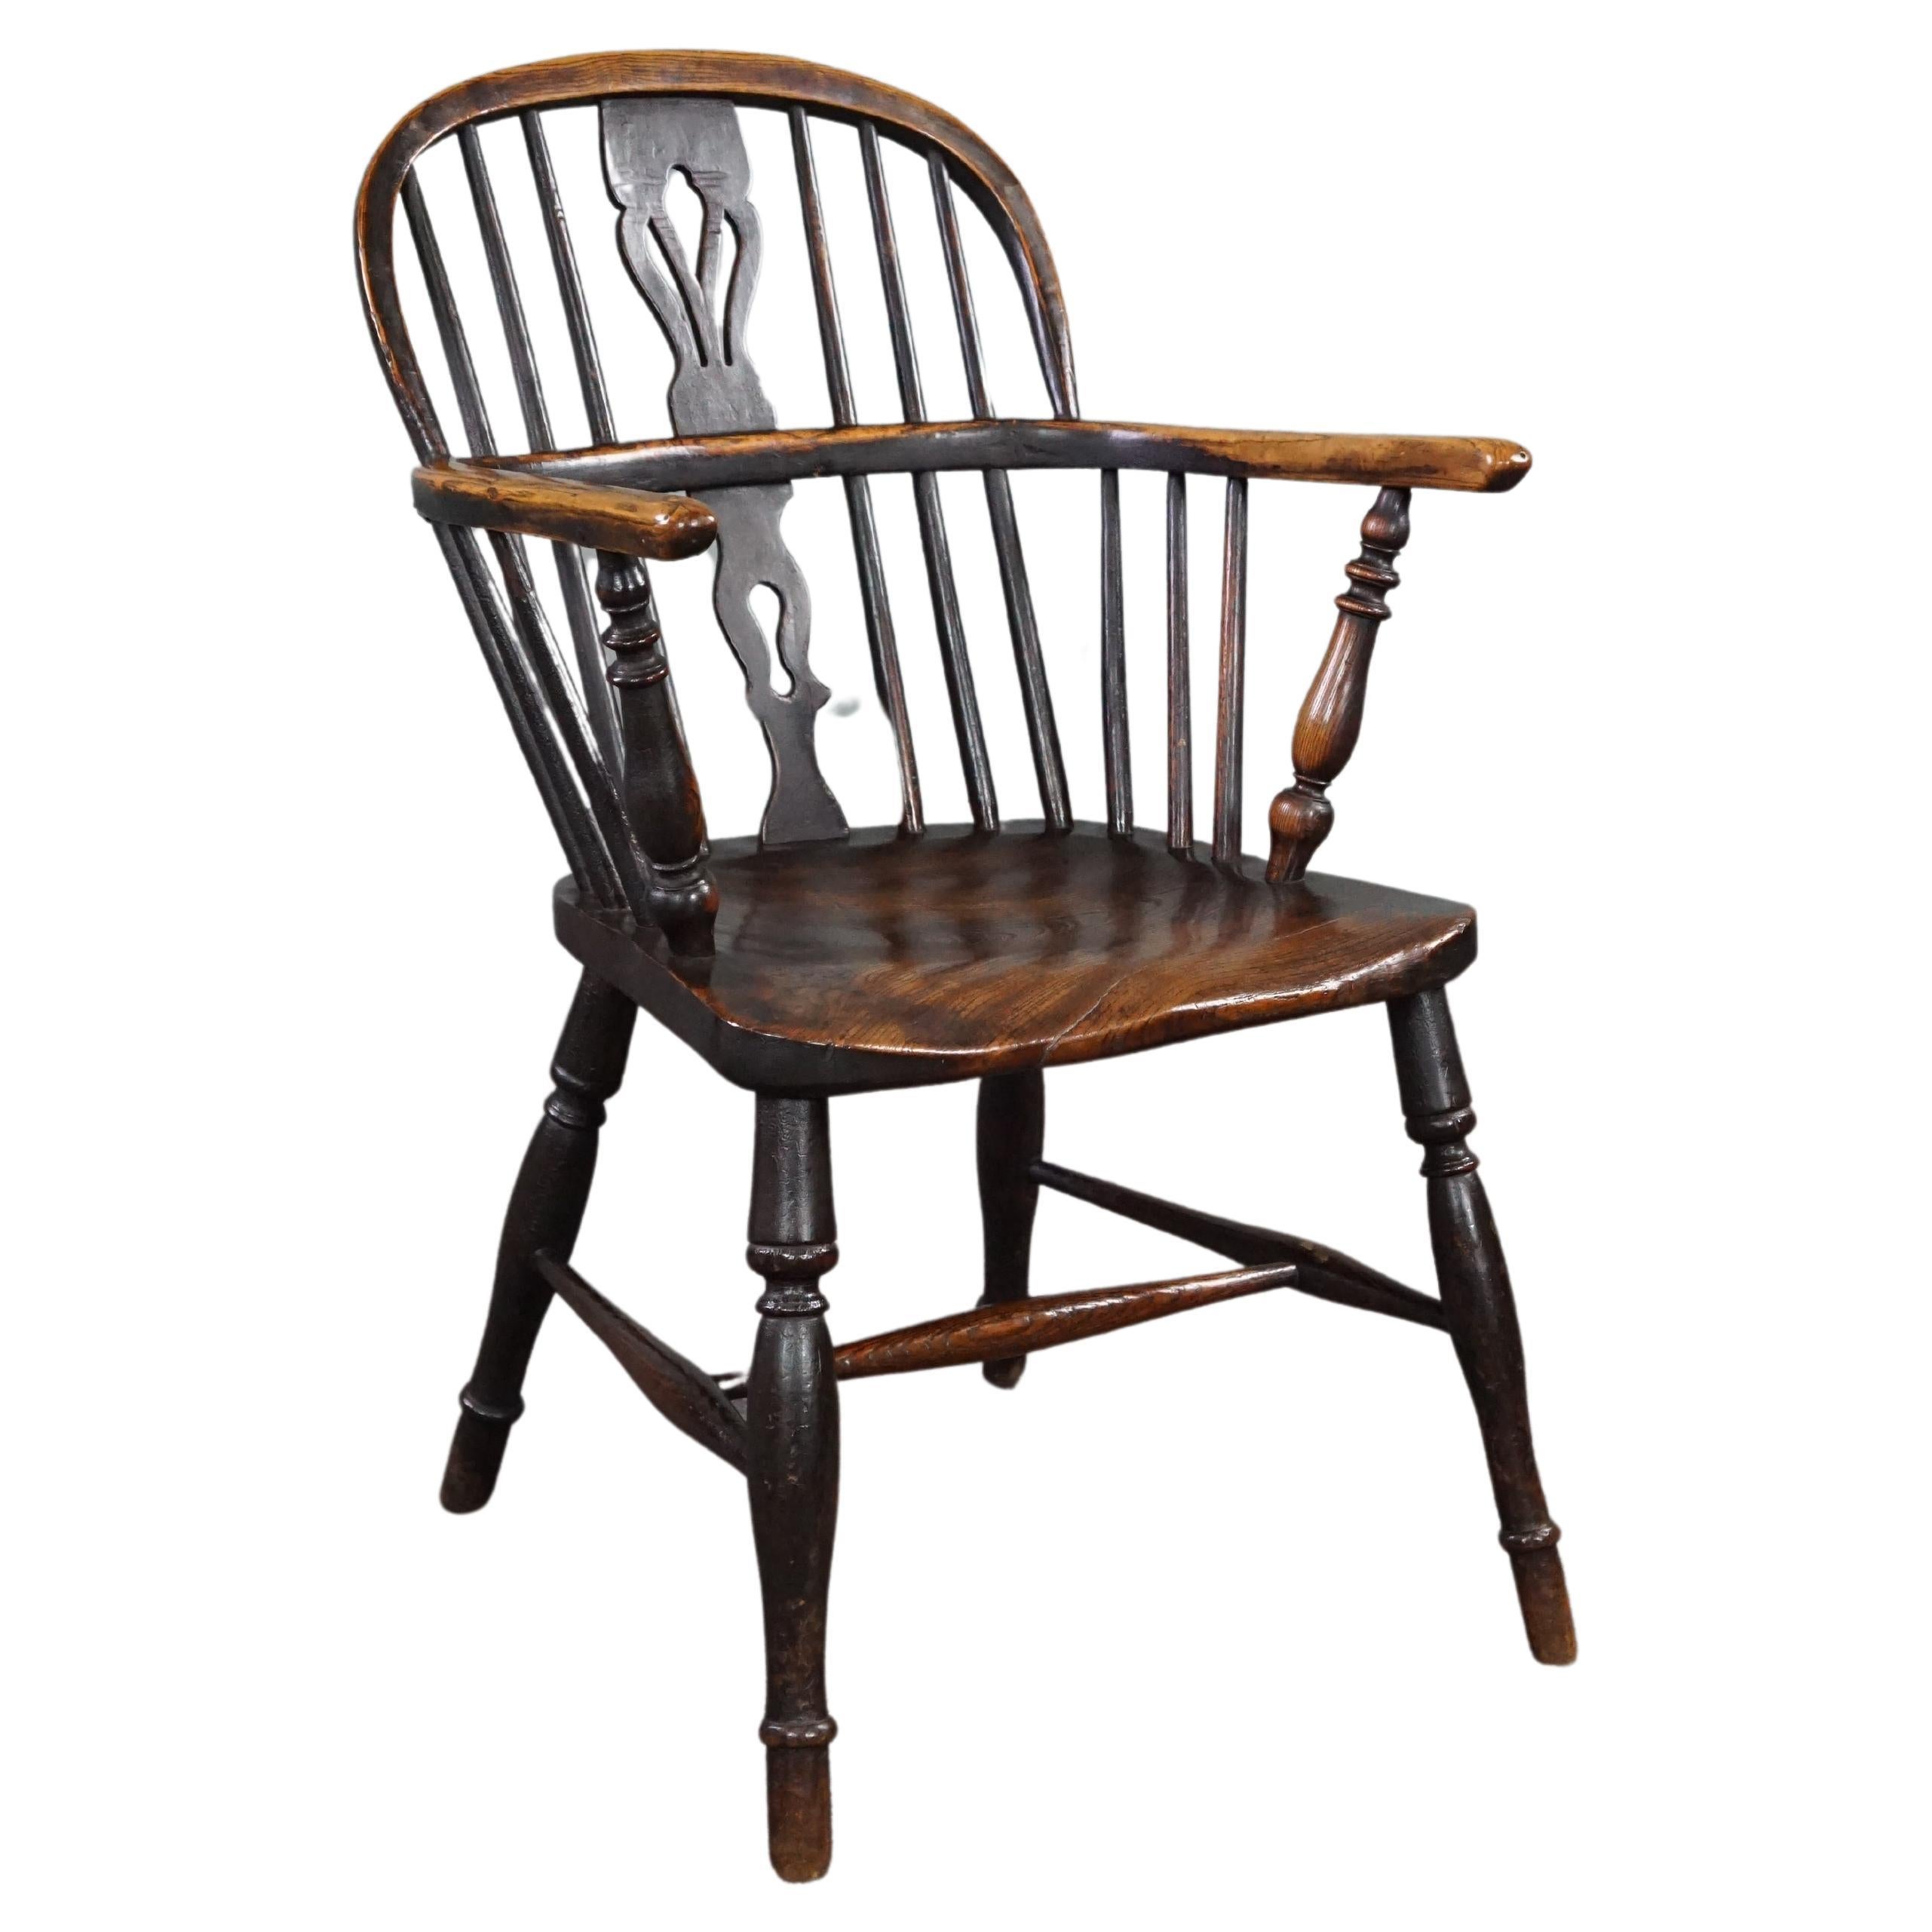 Very old charming antique English low back Windsor Armchair/armchair, 18th centu For Sale